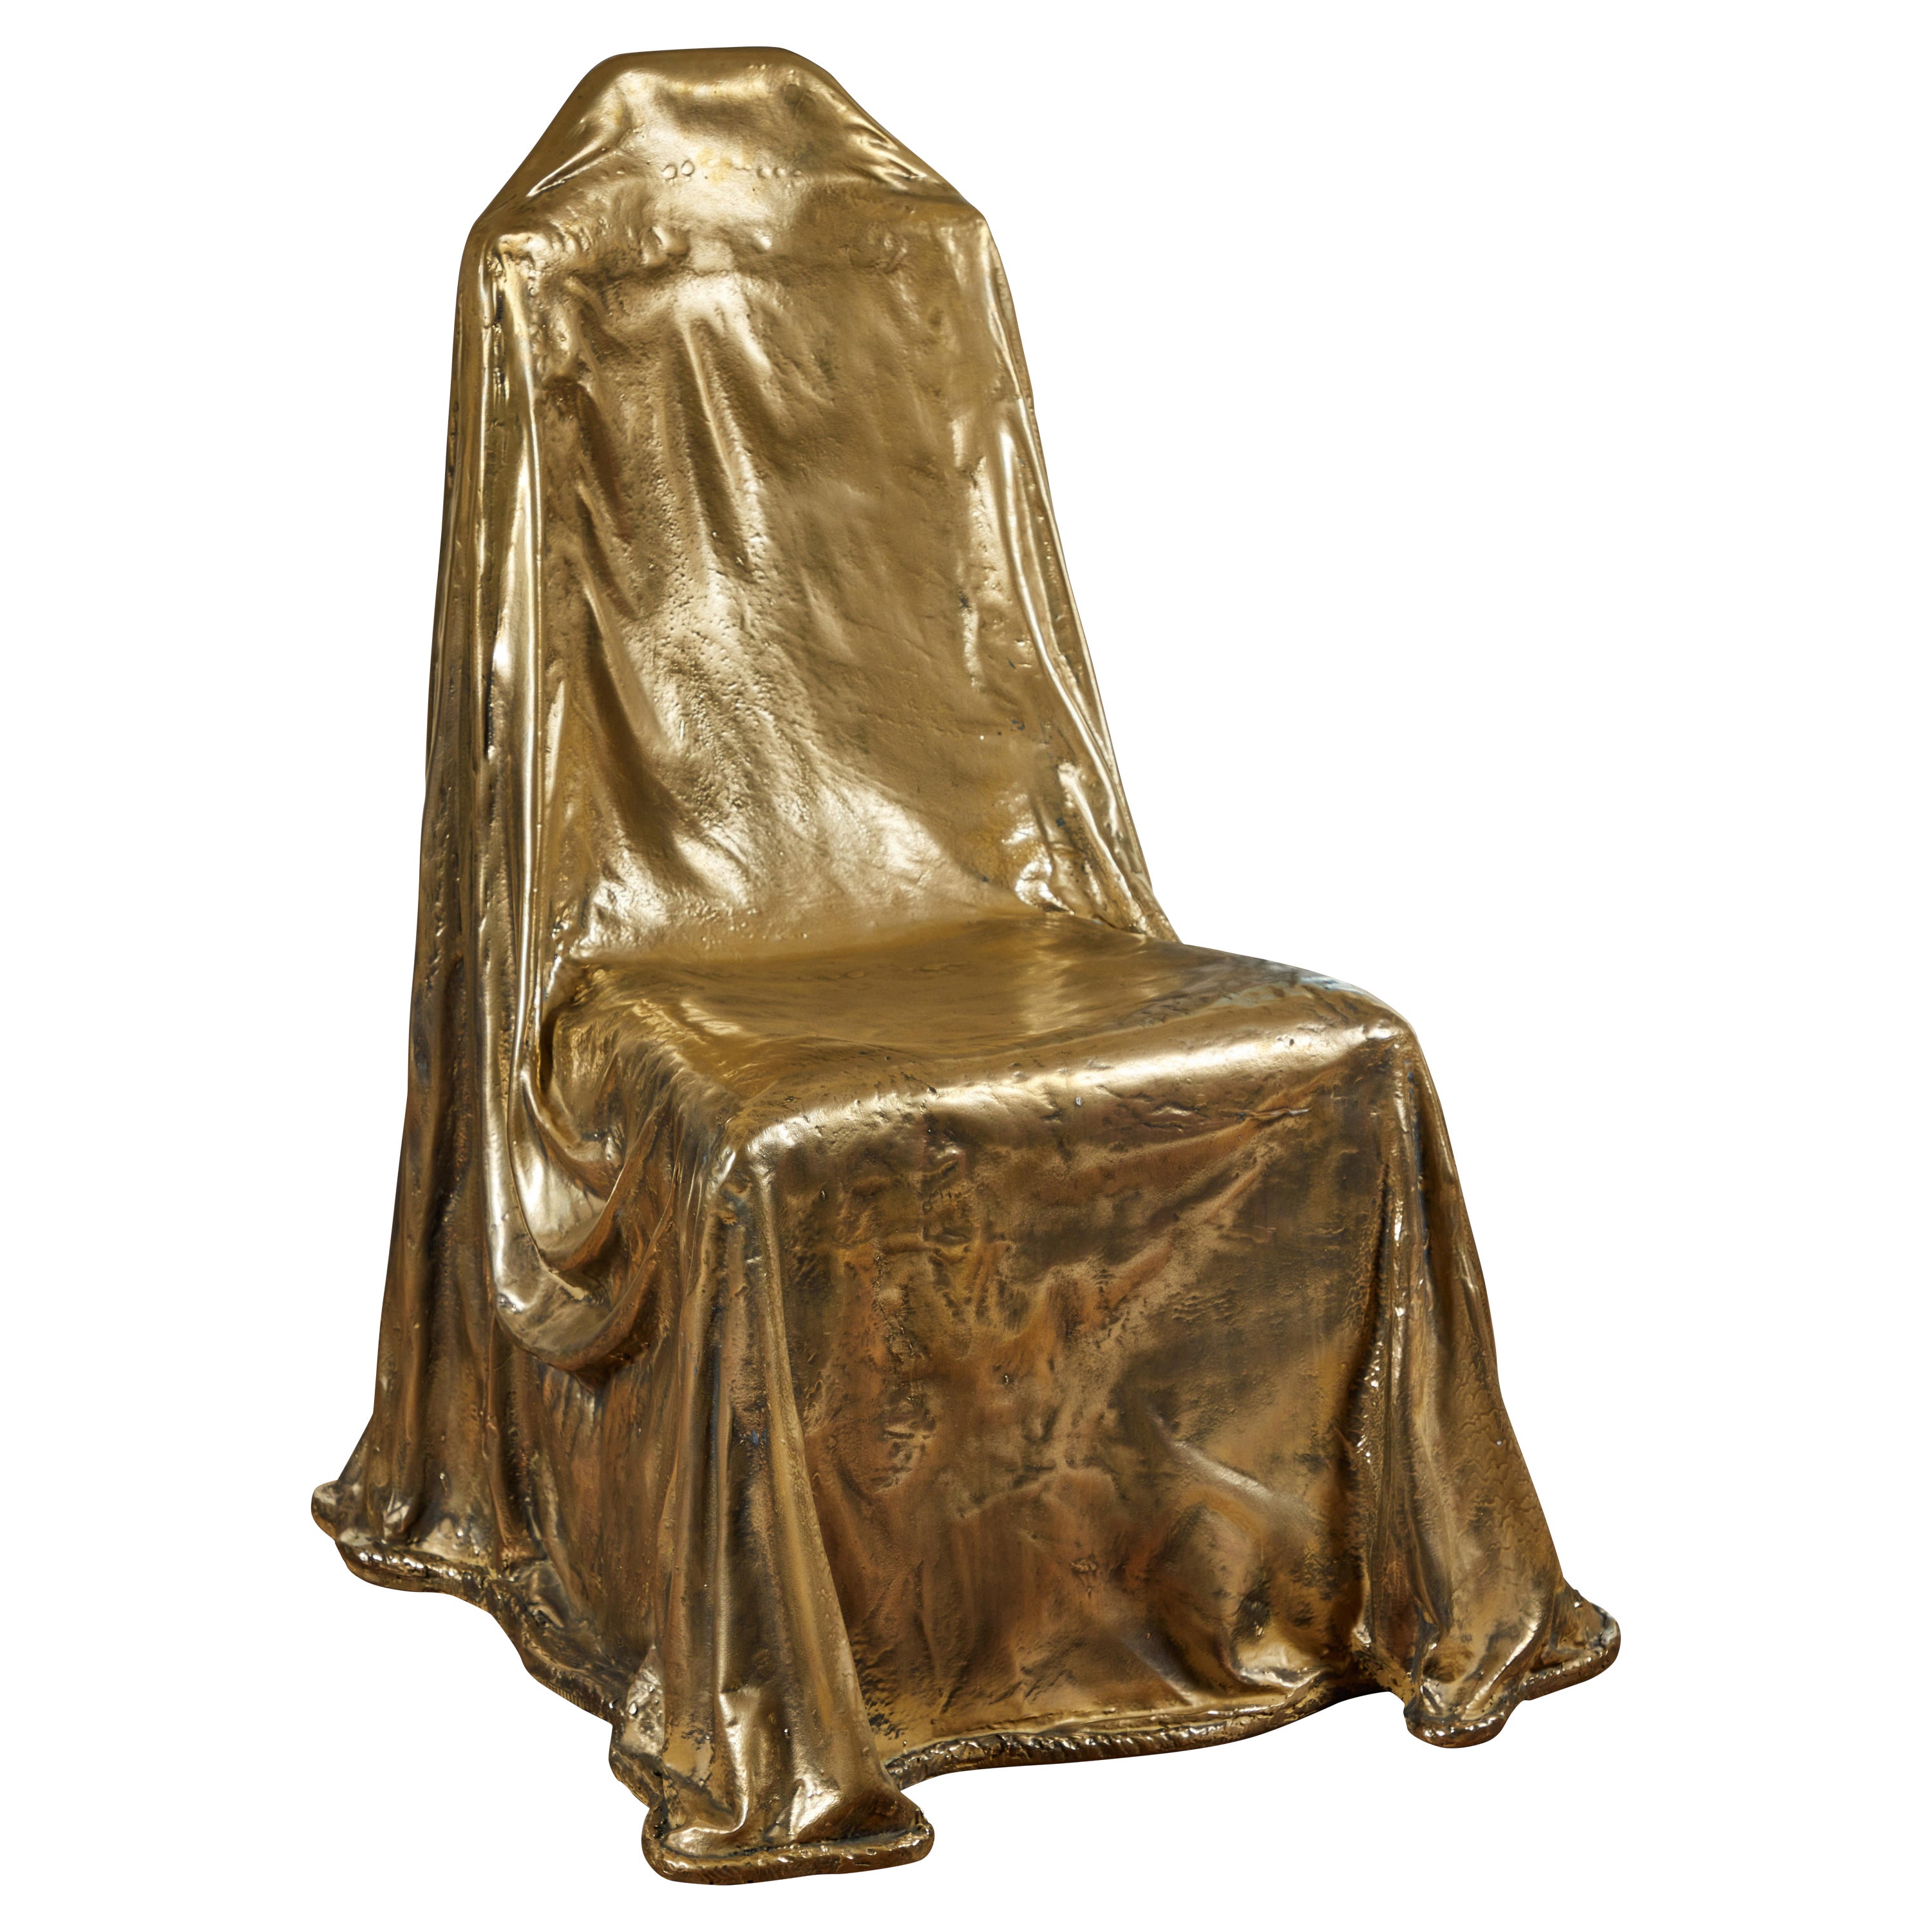 Trompe L"oeil Draped Chair in the Style of John Dickinson